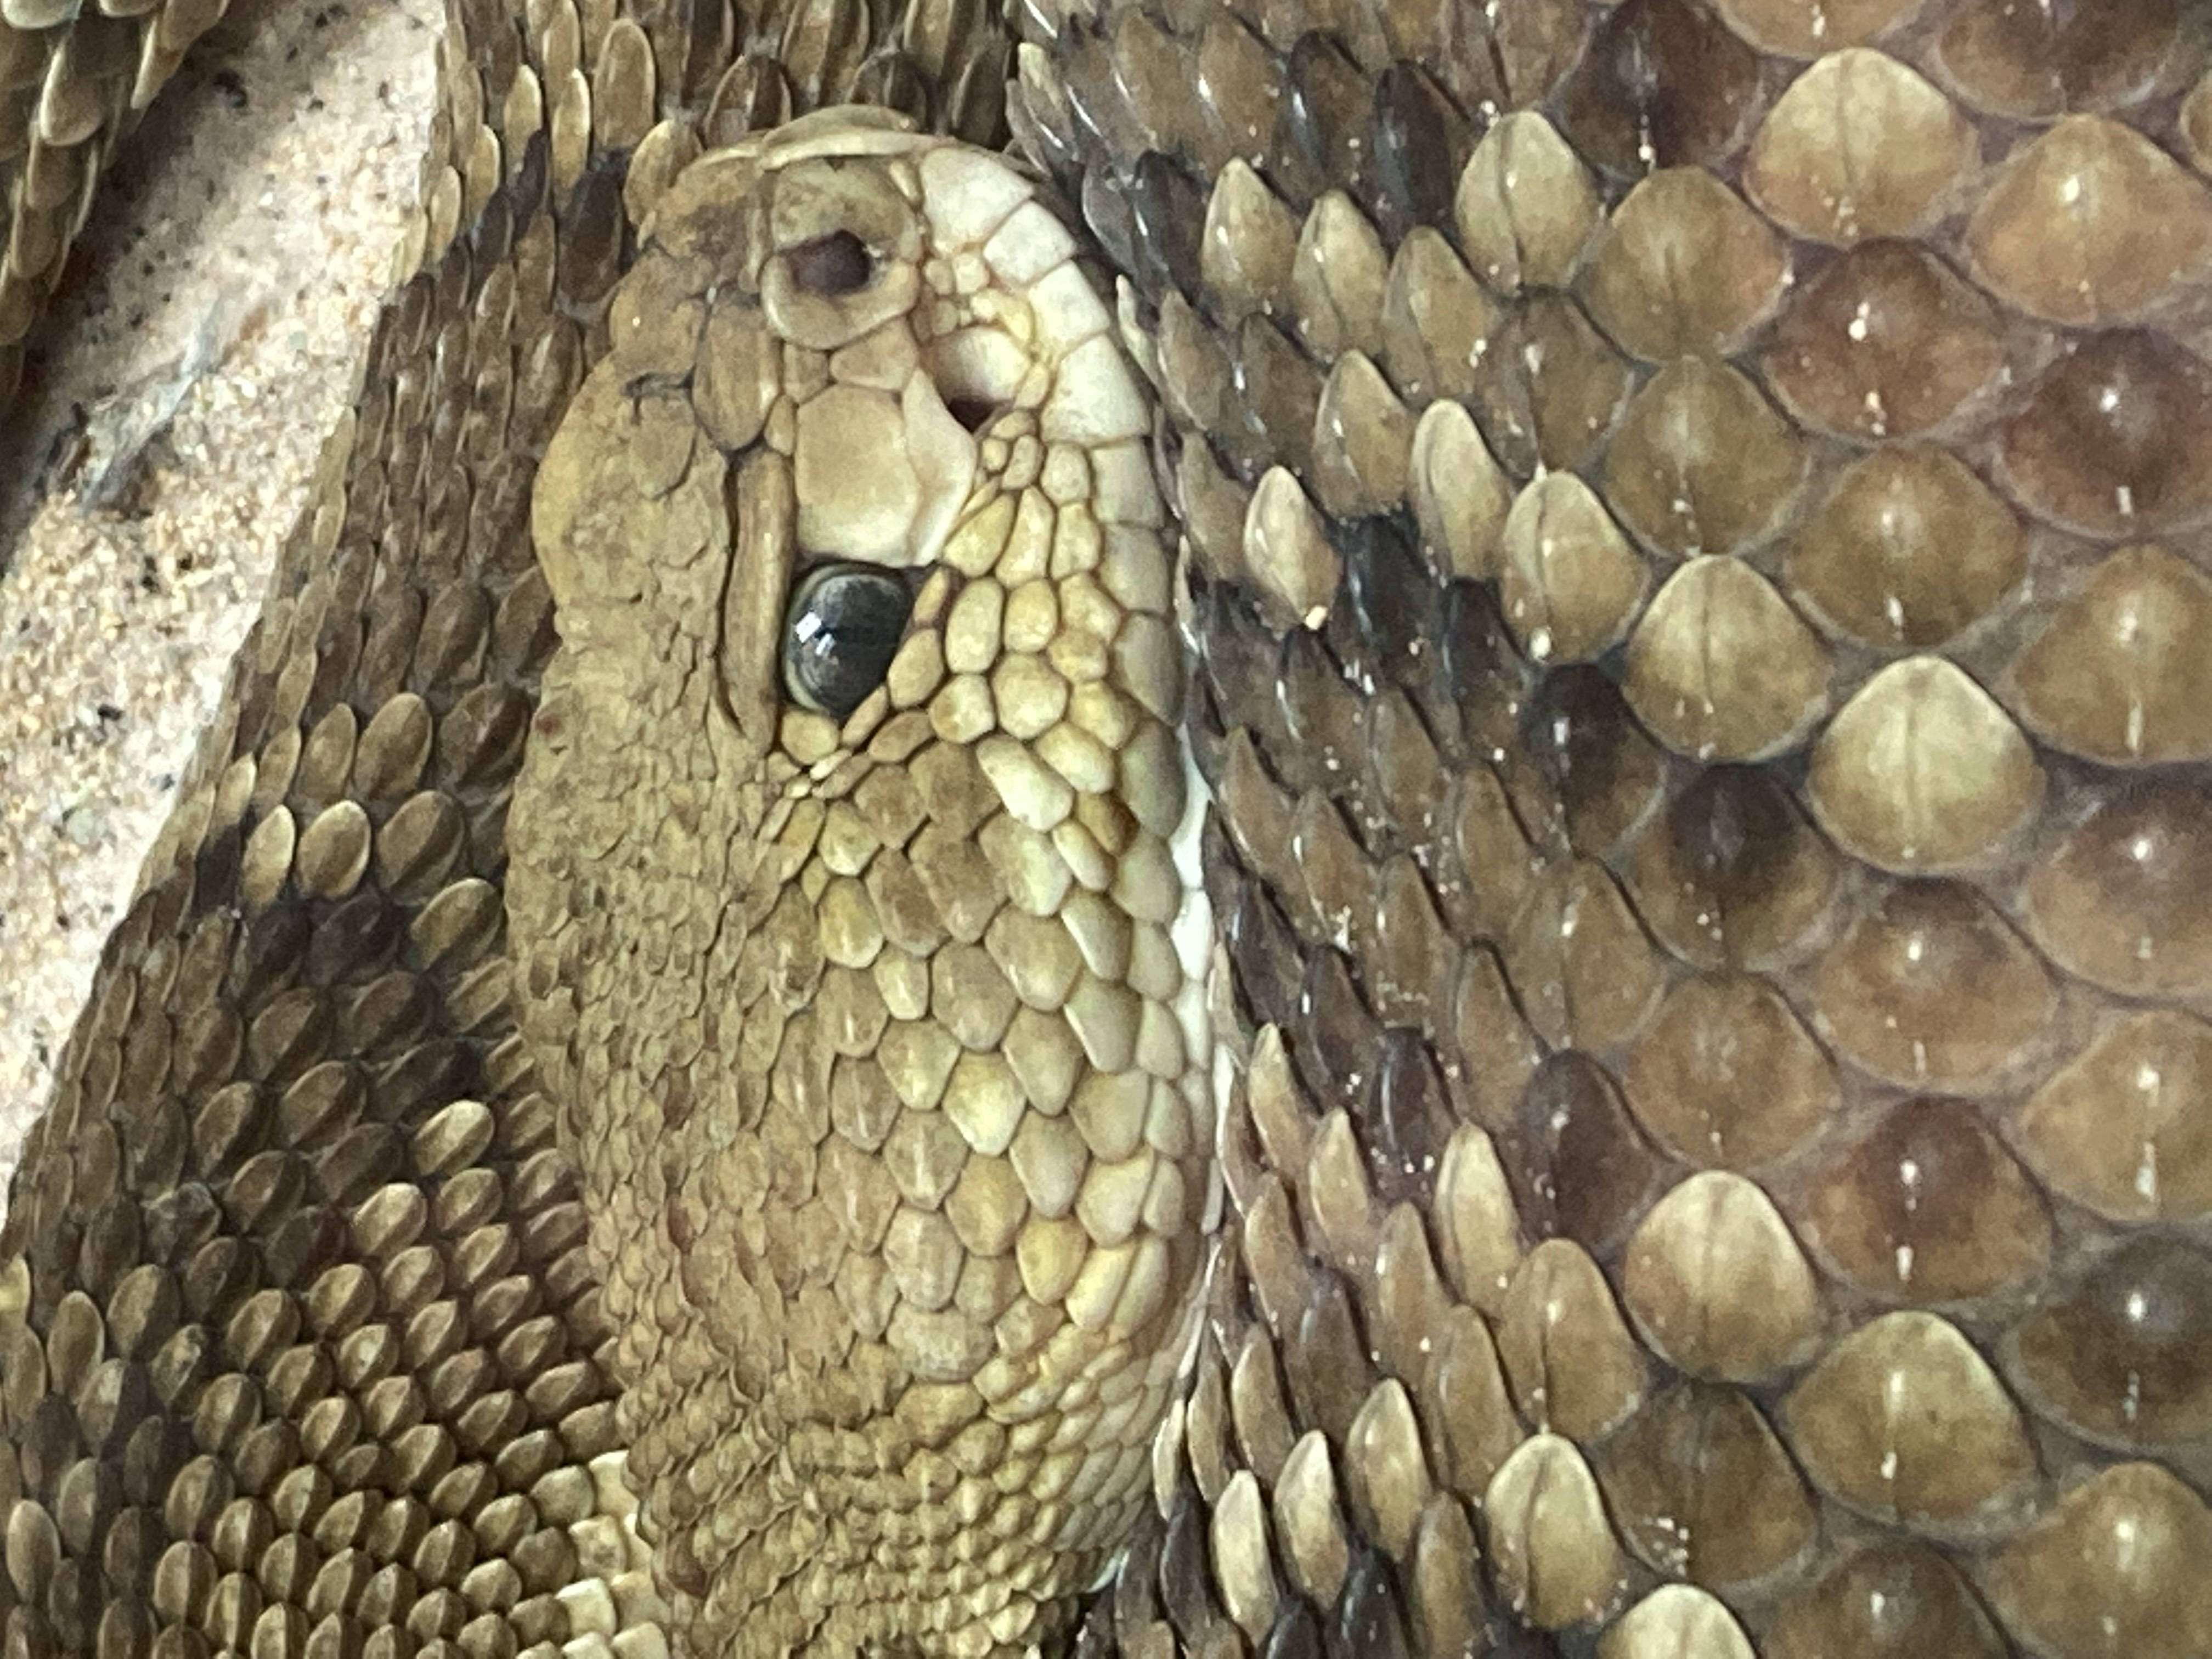 a closeup photo of a coiled rattlesnake with large scales of varying shades of gray and brown. the side of its head and one striking gray eye are visible in detail in the center of the frame